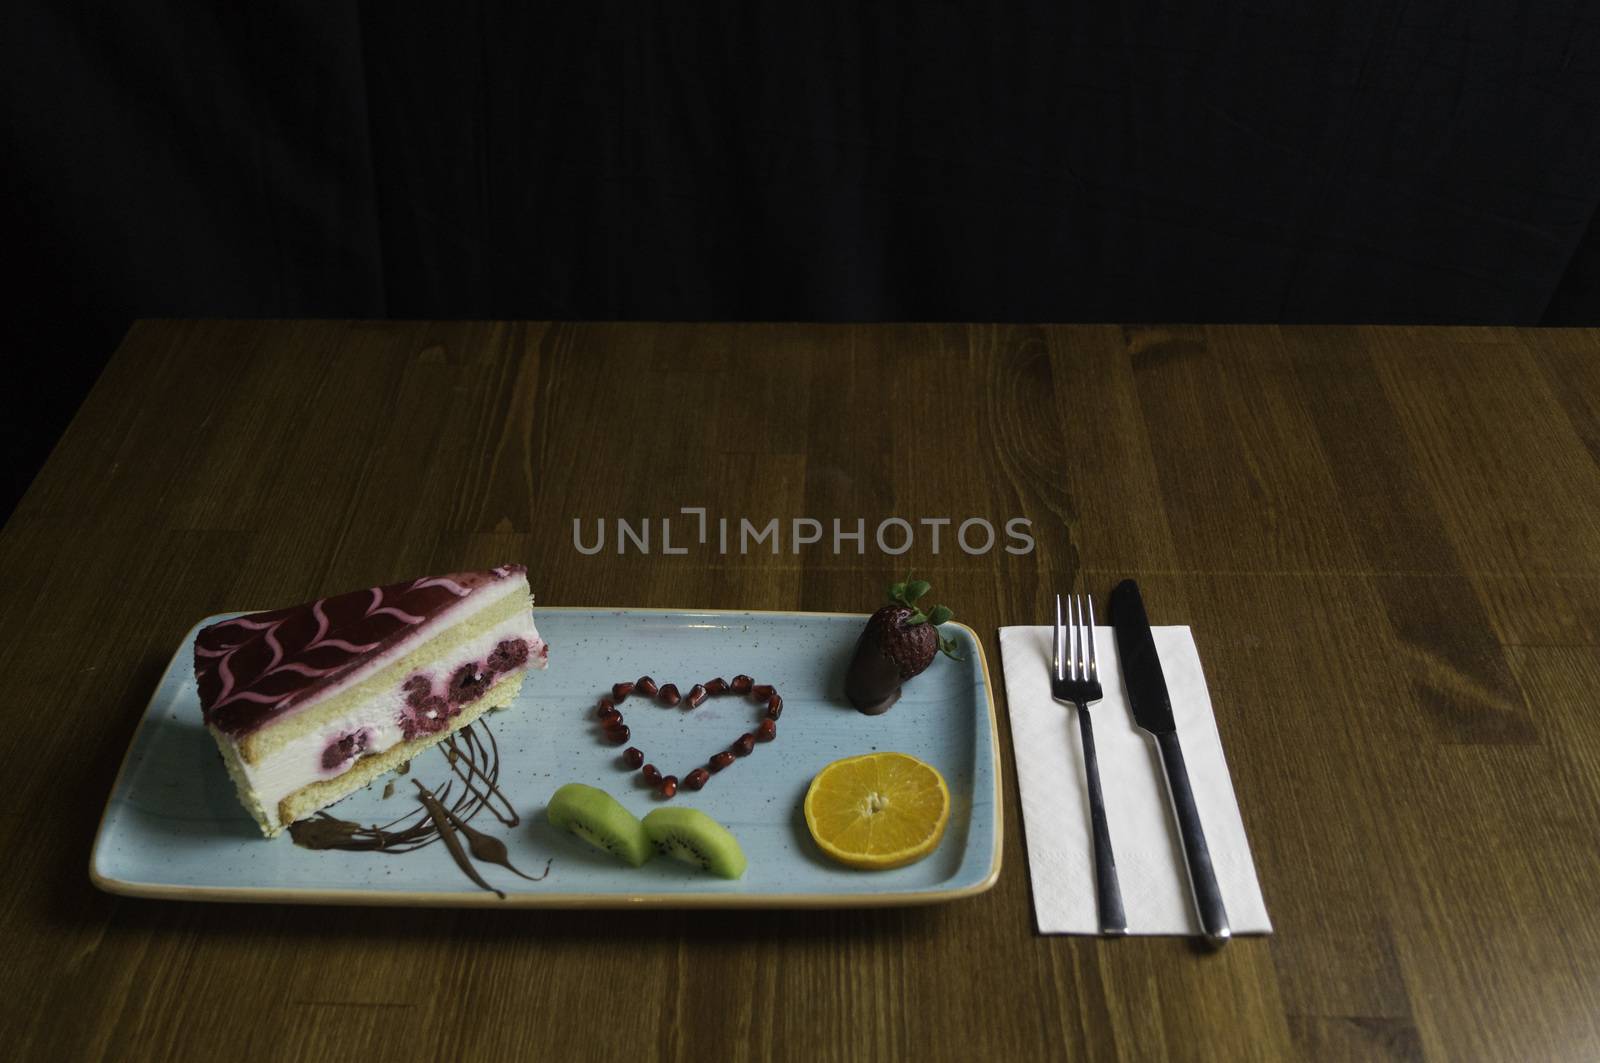 In carefully crafted serving tray cake and sweets